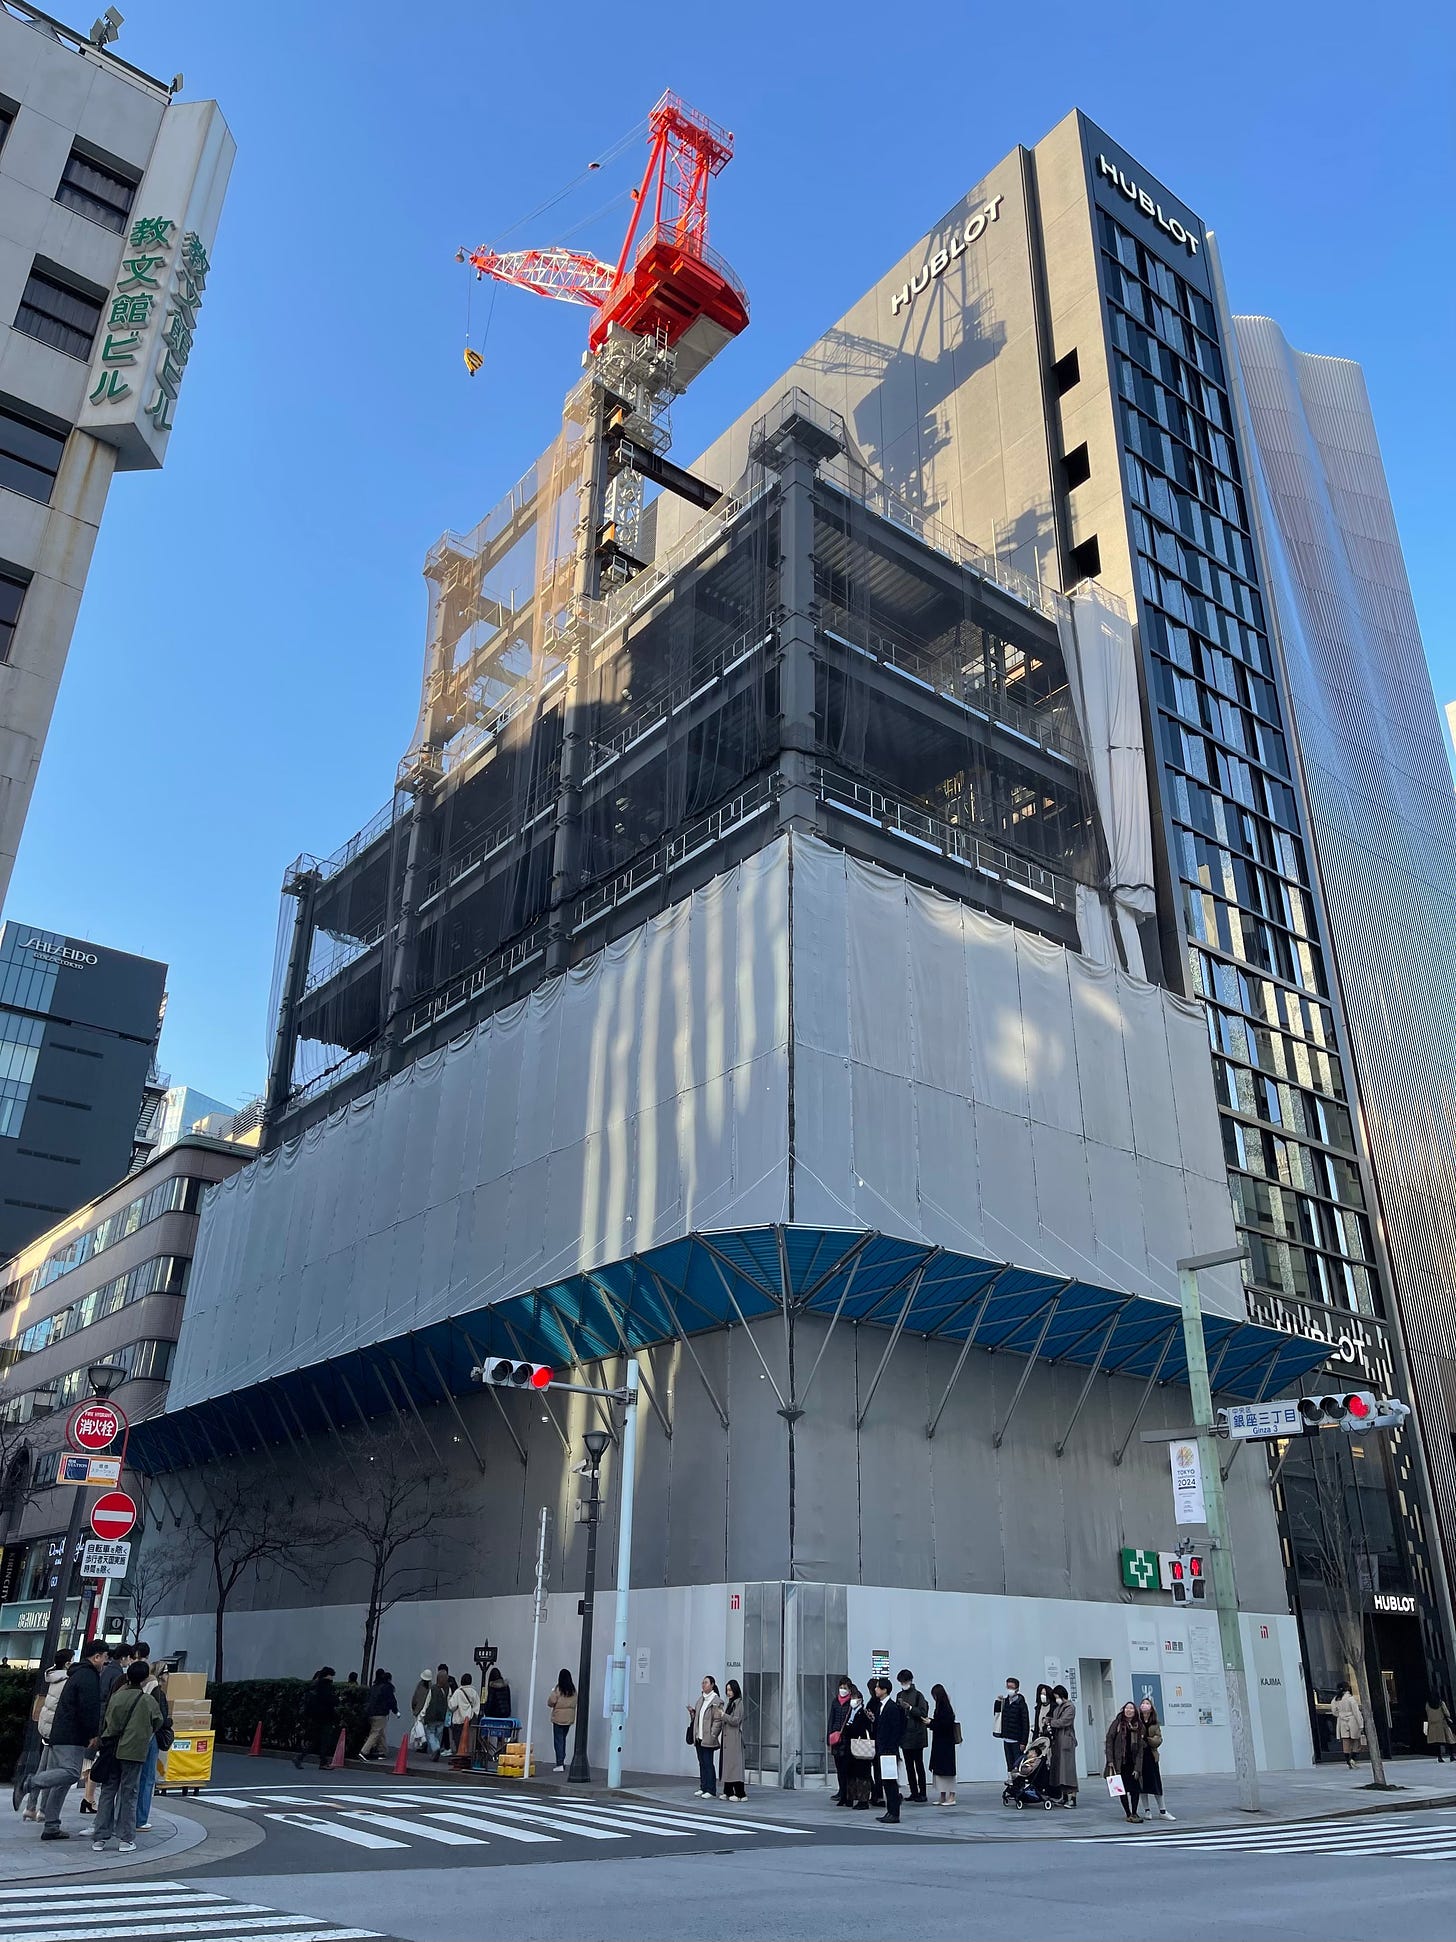 Construction progress at the new Apple Ginza. A large crane sits on the roof. The building is significantly taller than the previous structure.